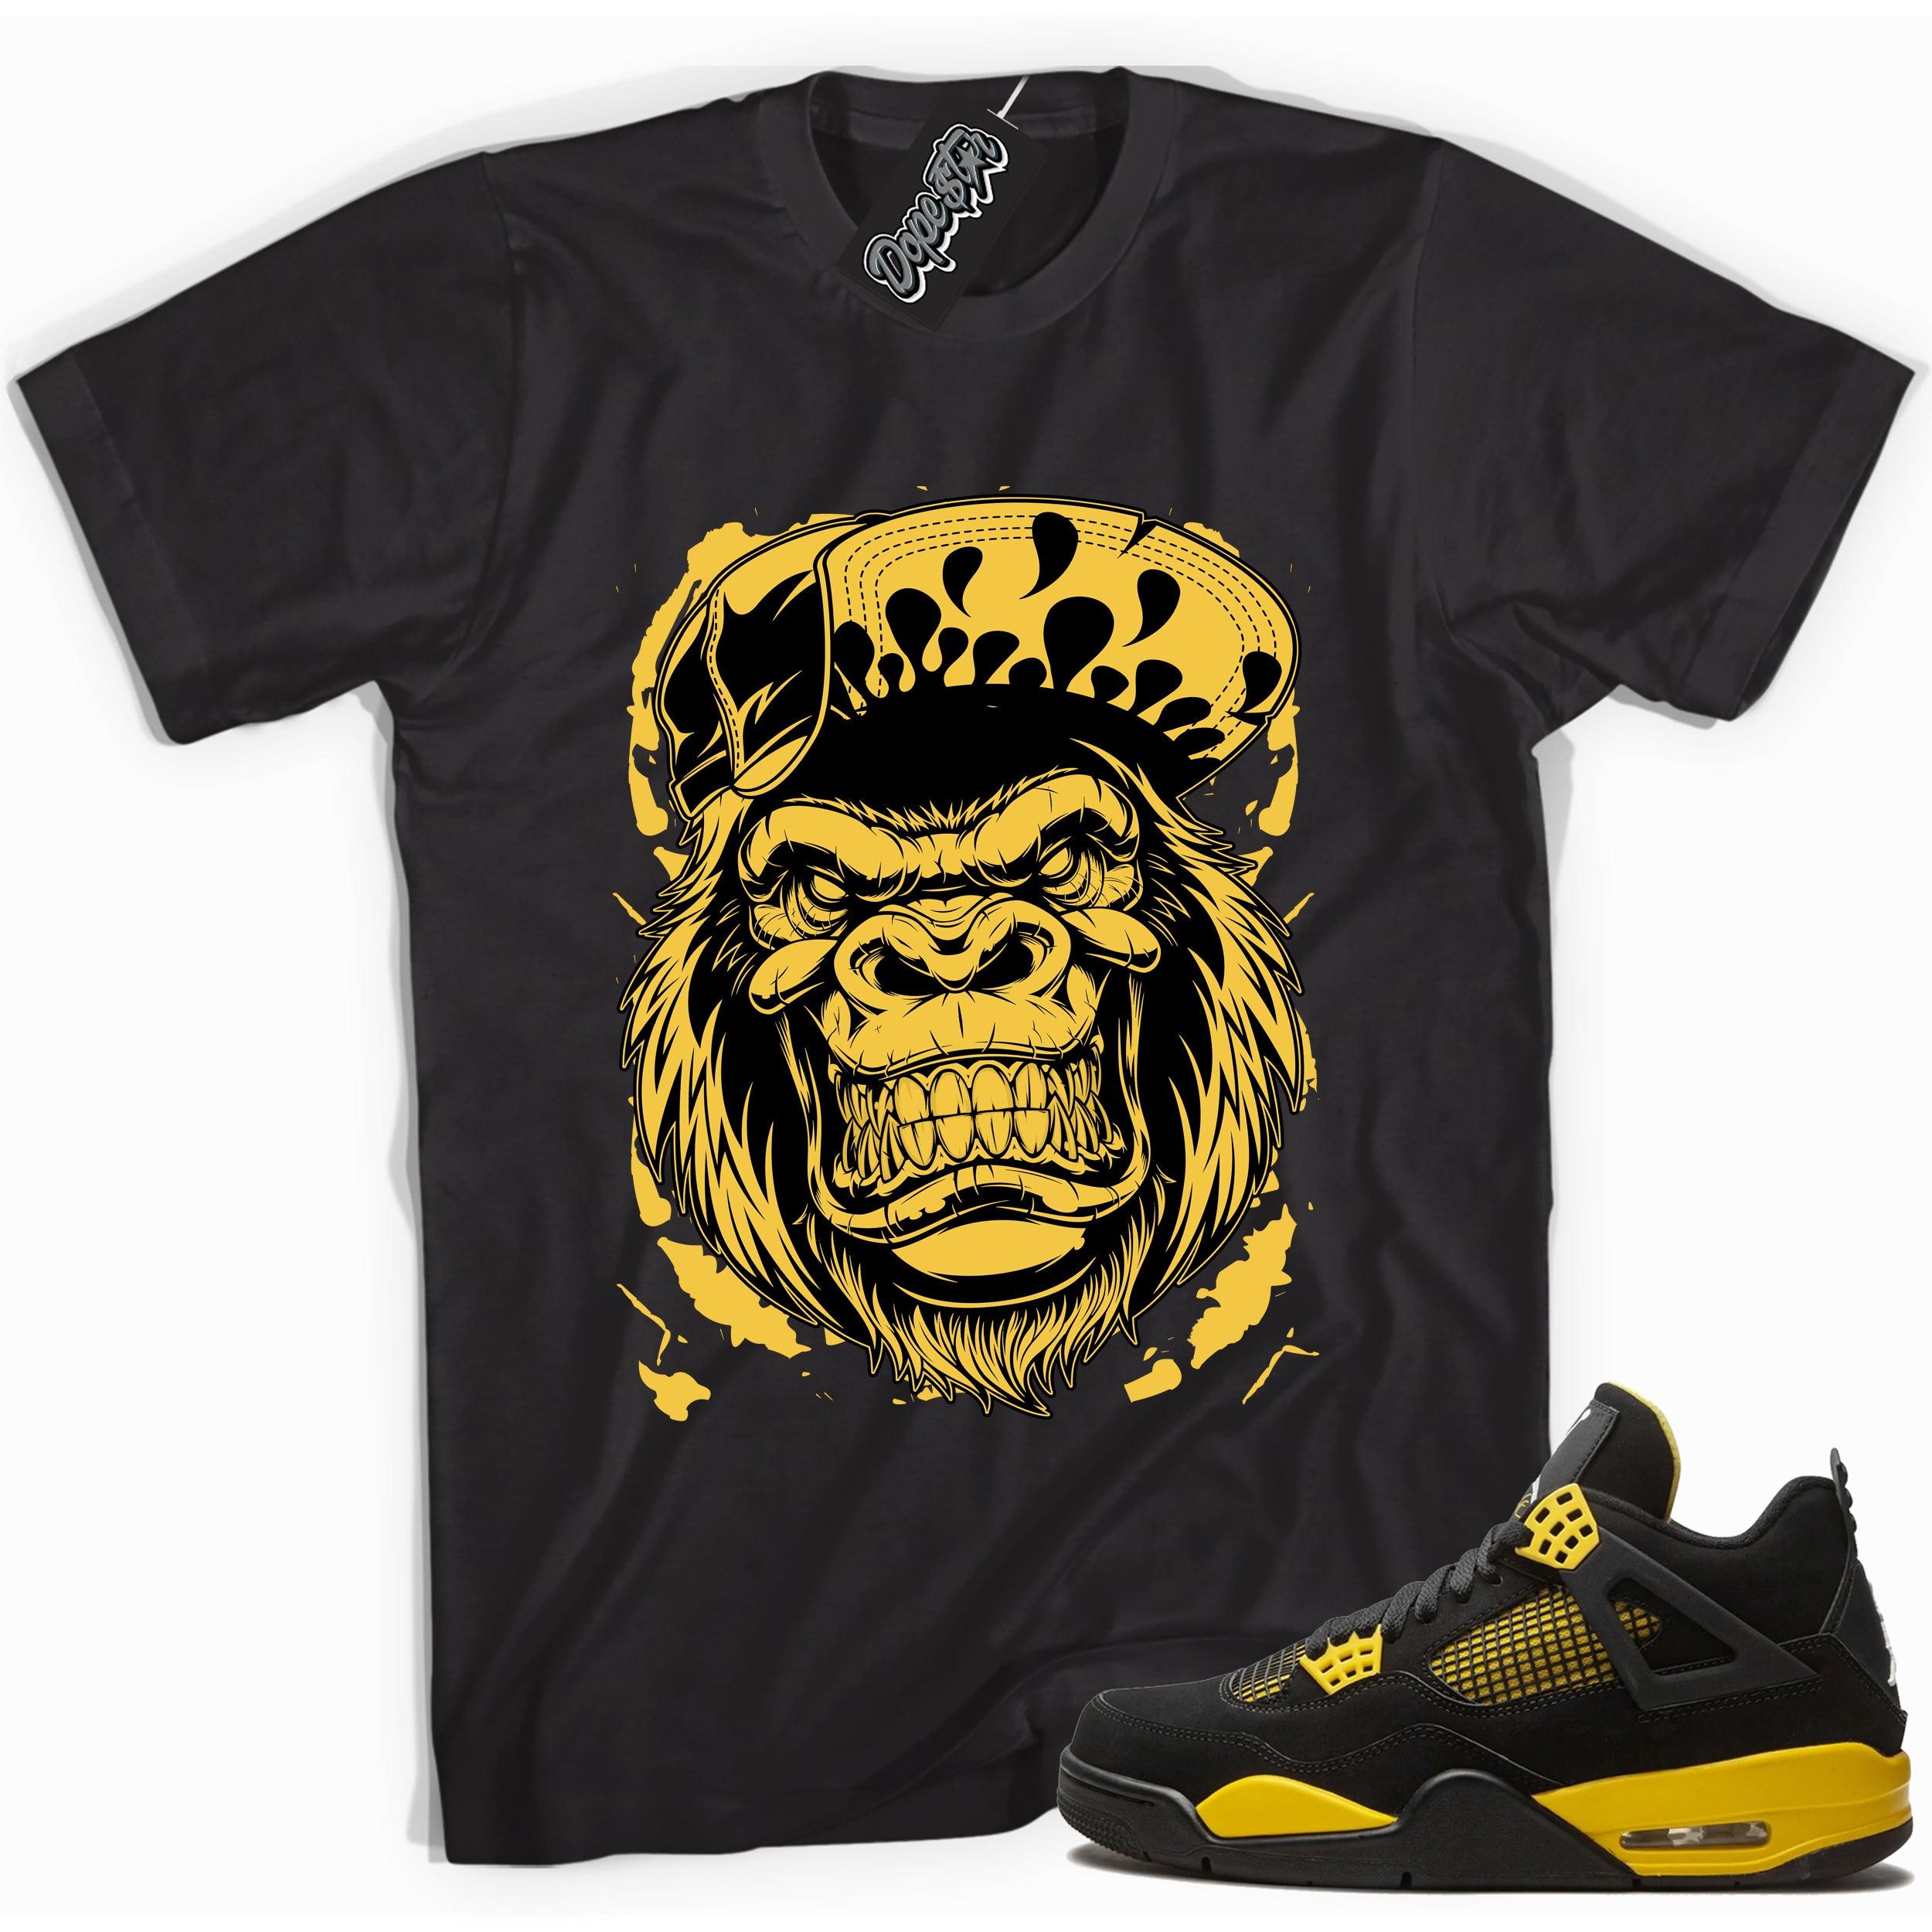 Cool black graphic tee with 'gorilla beast' print, that perfectly matches  Air Jordan 4 Thunder sneakers